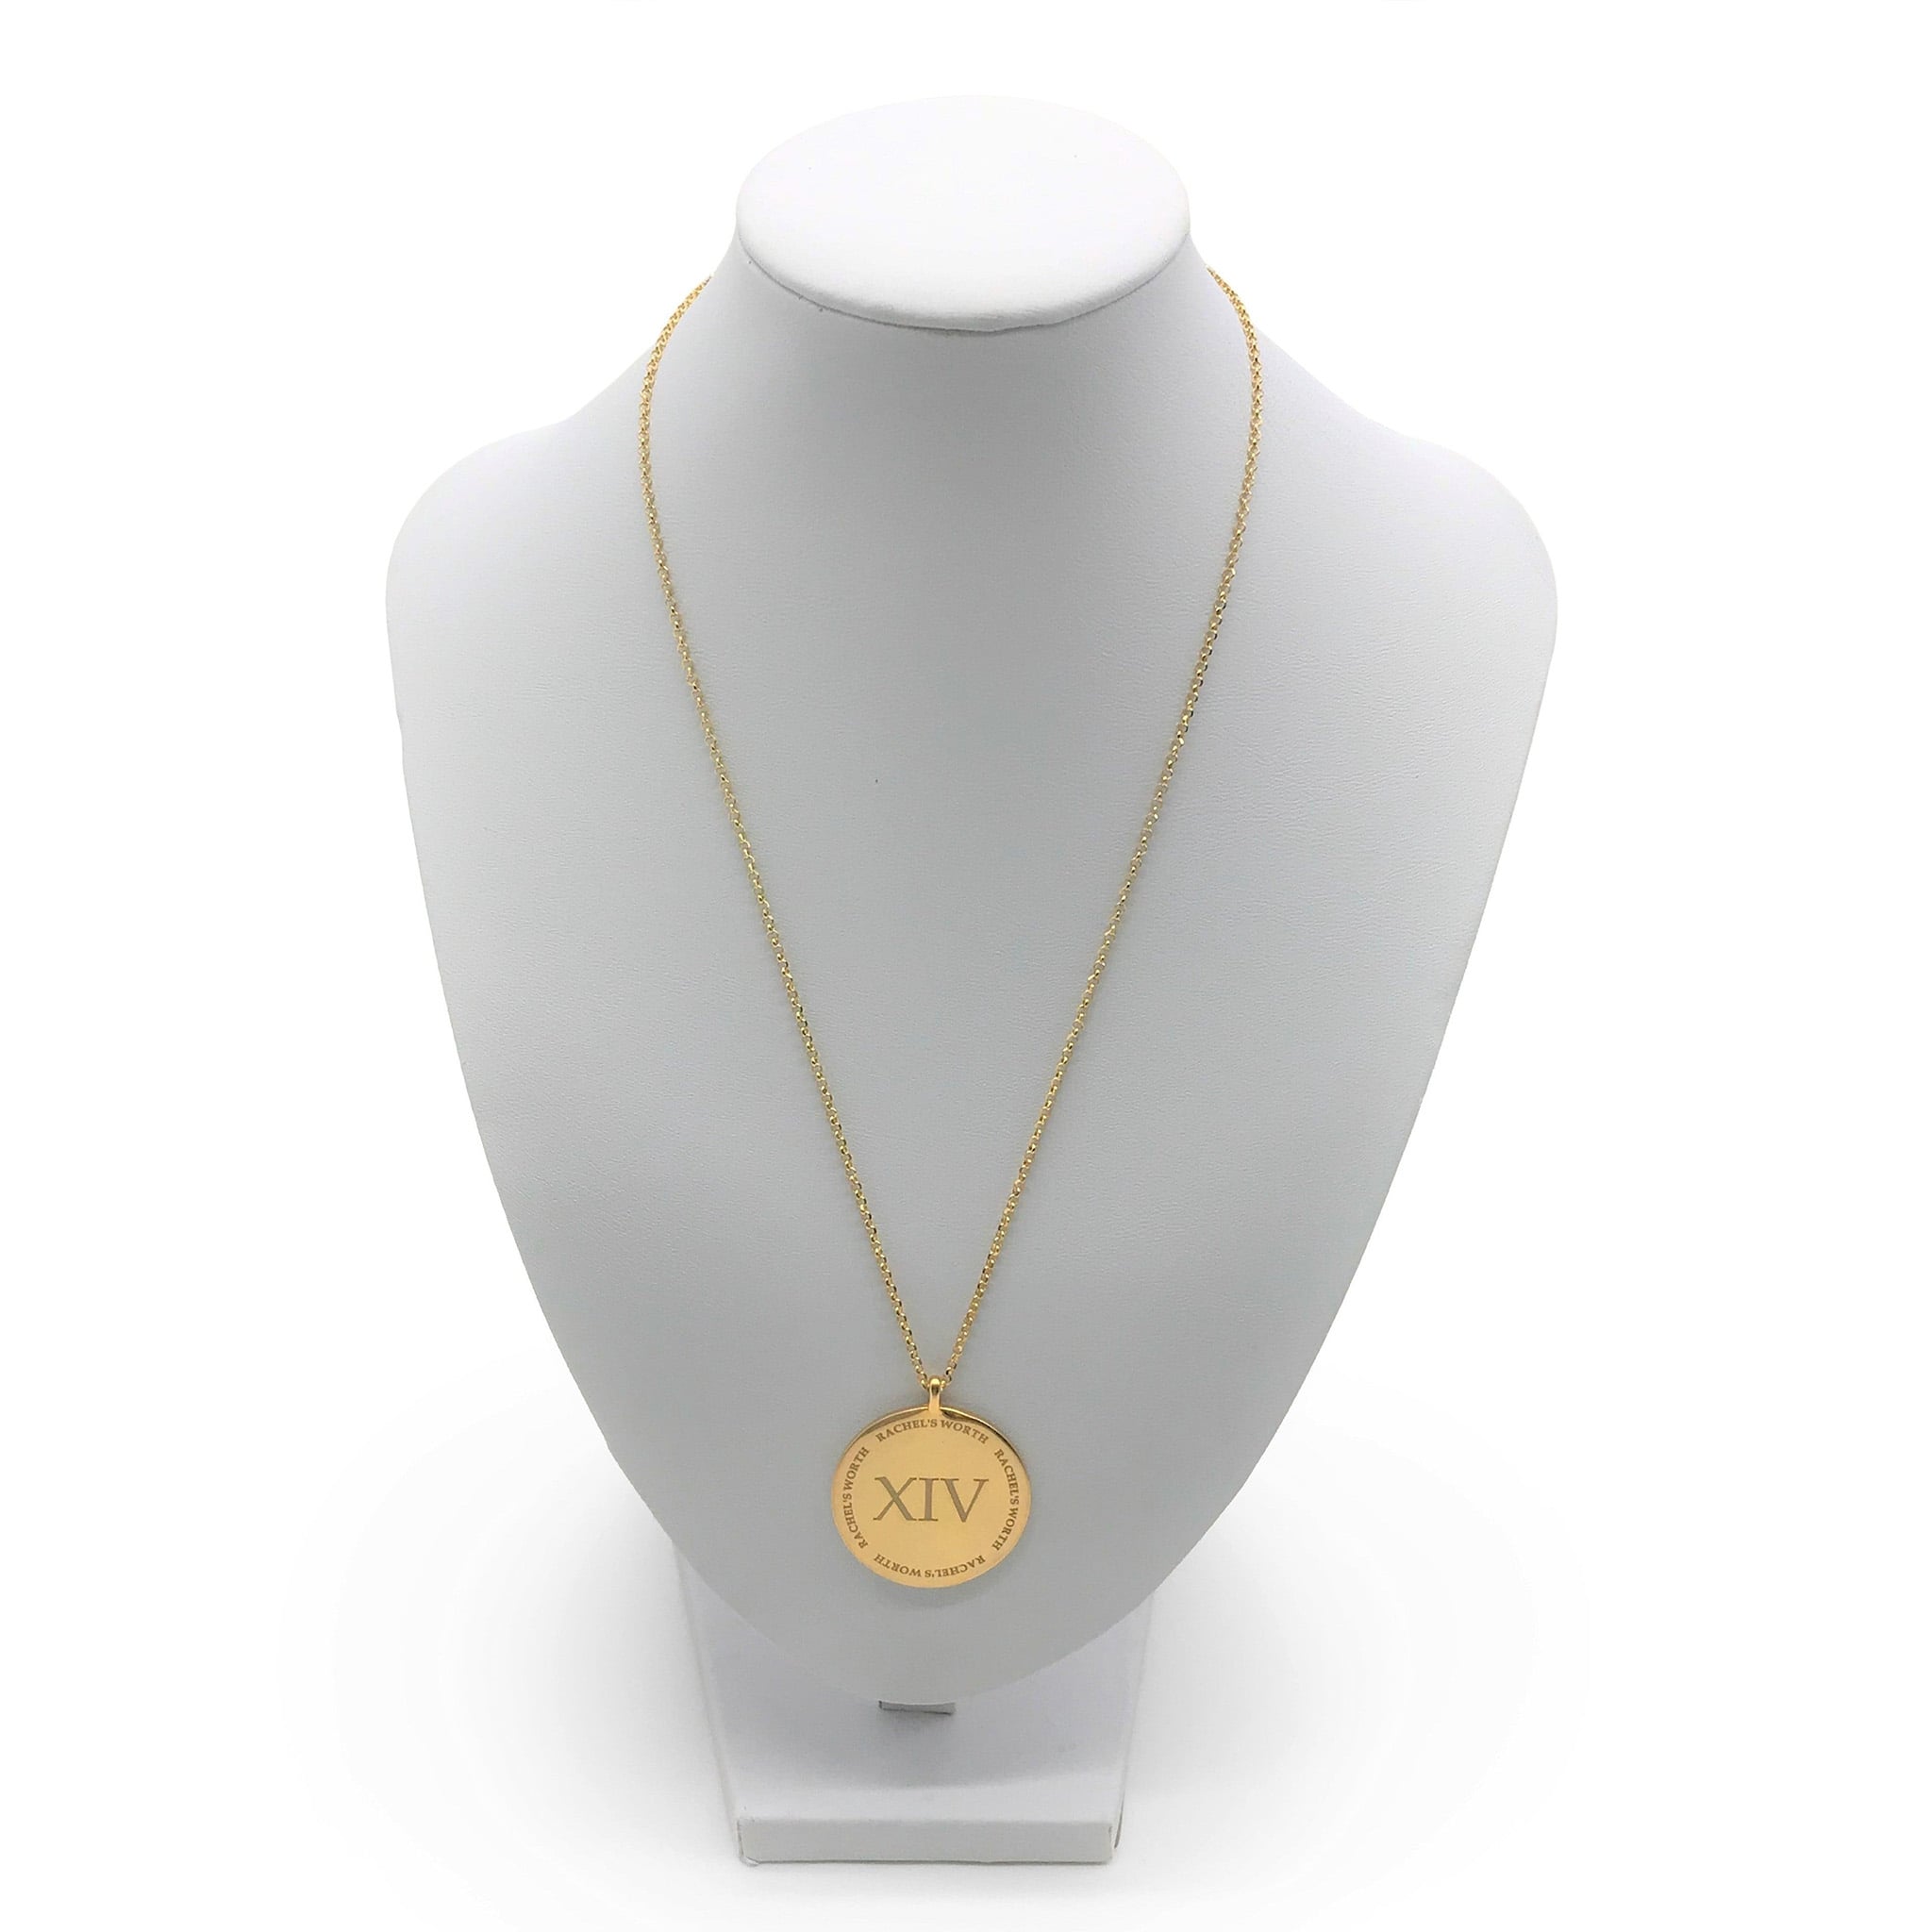 XIV Coin Necklace in 18k Yellow Gold Vermeil